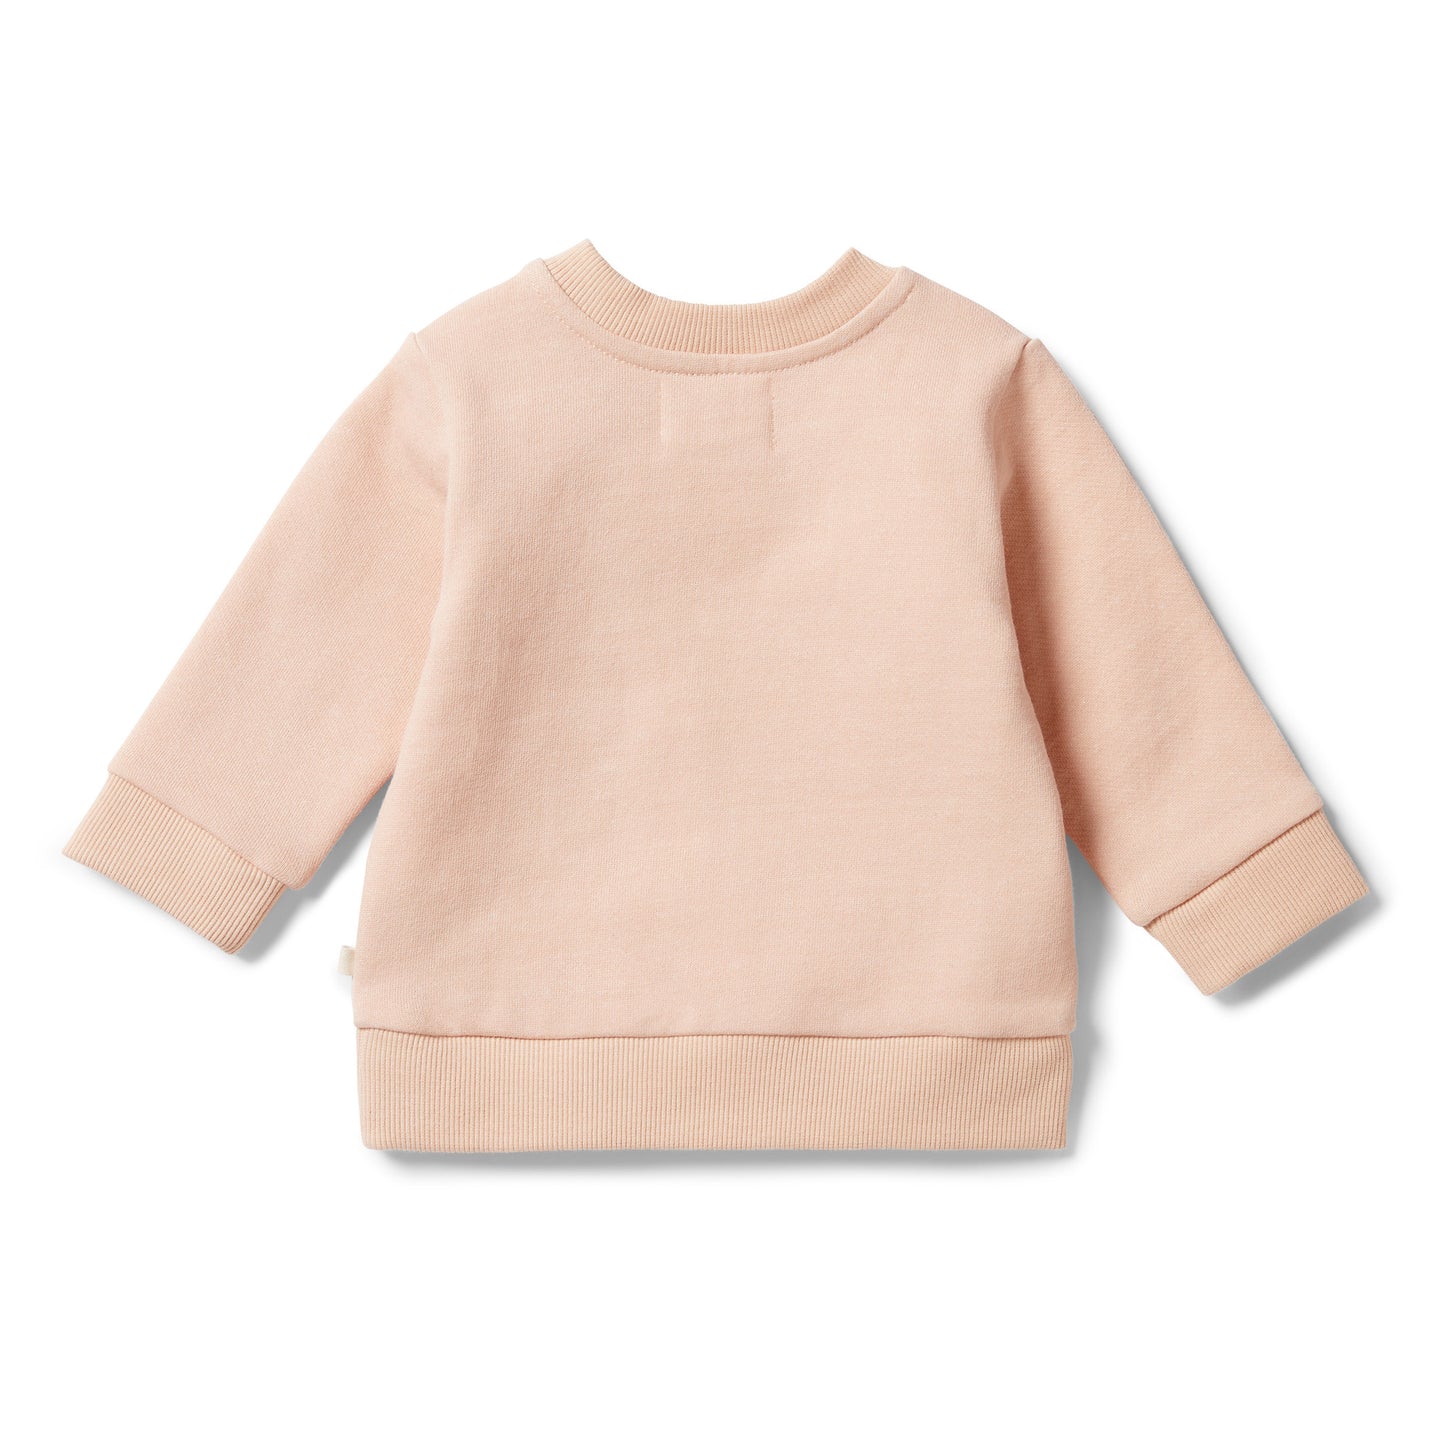 WILSON & FRENCHY - Organic French Terry Sweat | 'I'm a Keeper' | Cameo Rose